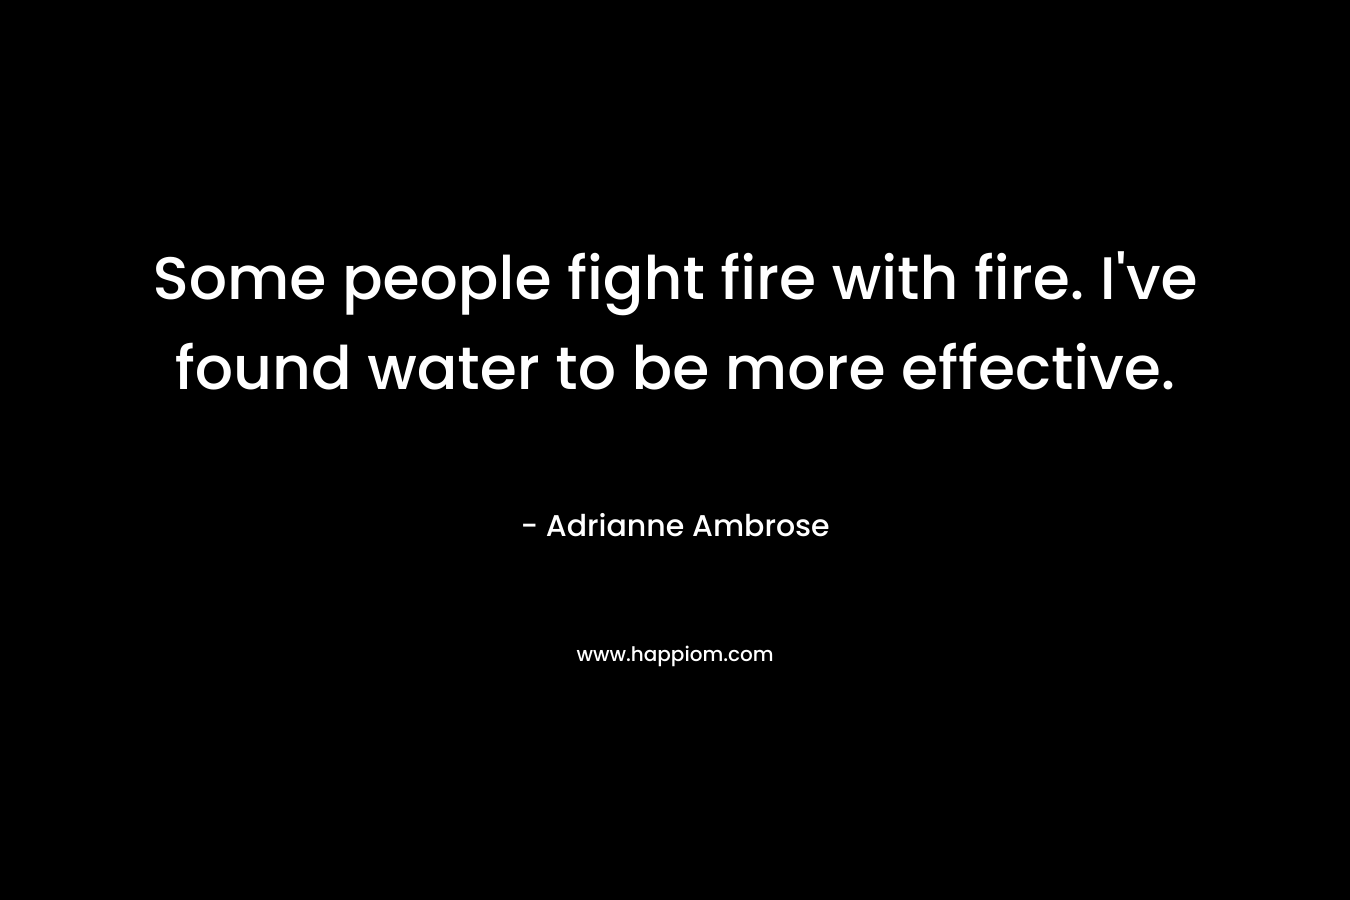 Some people fight fire with fire. I've found water to be more effective.